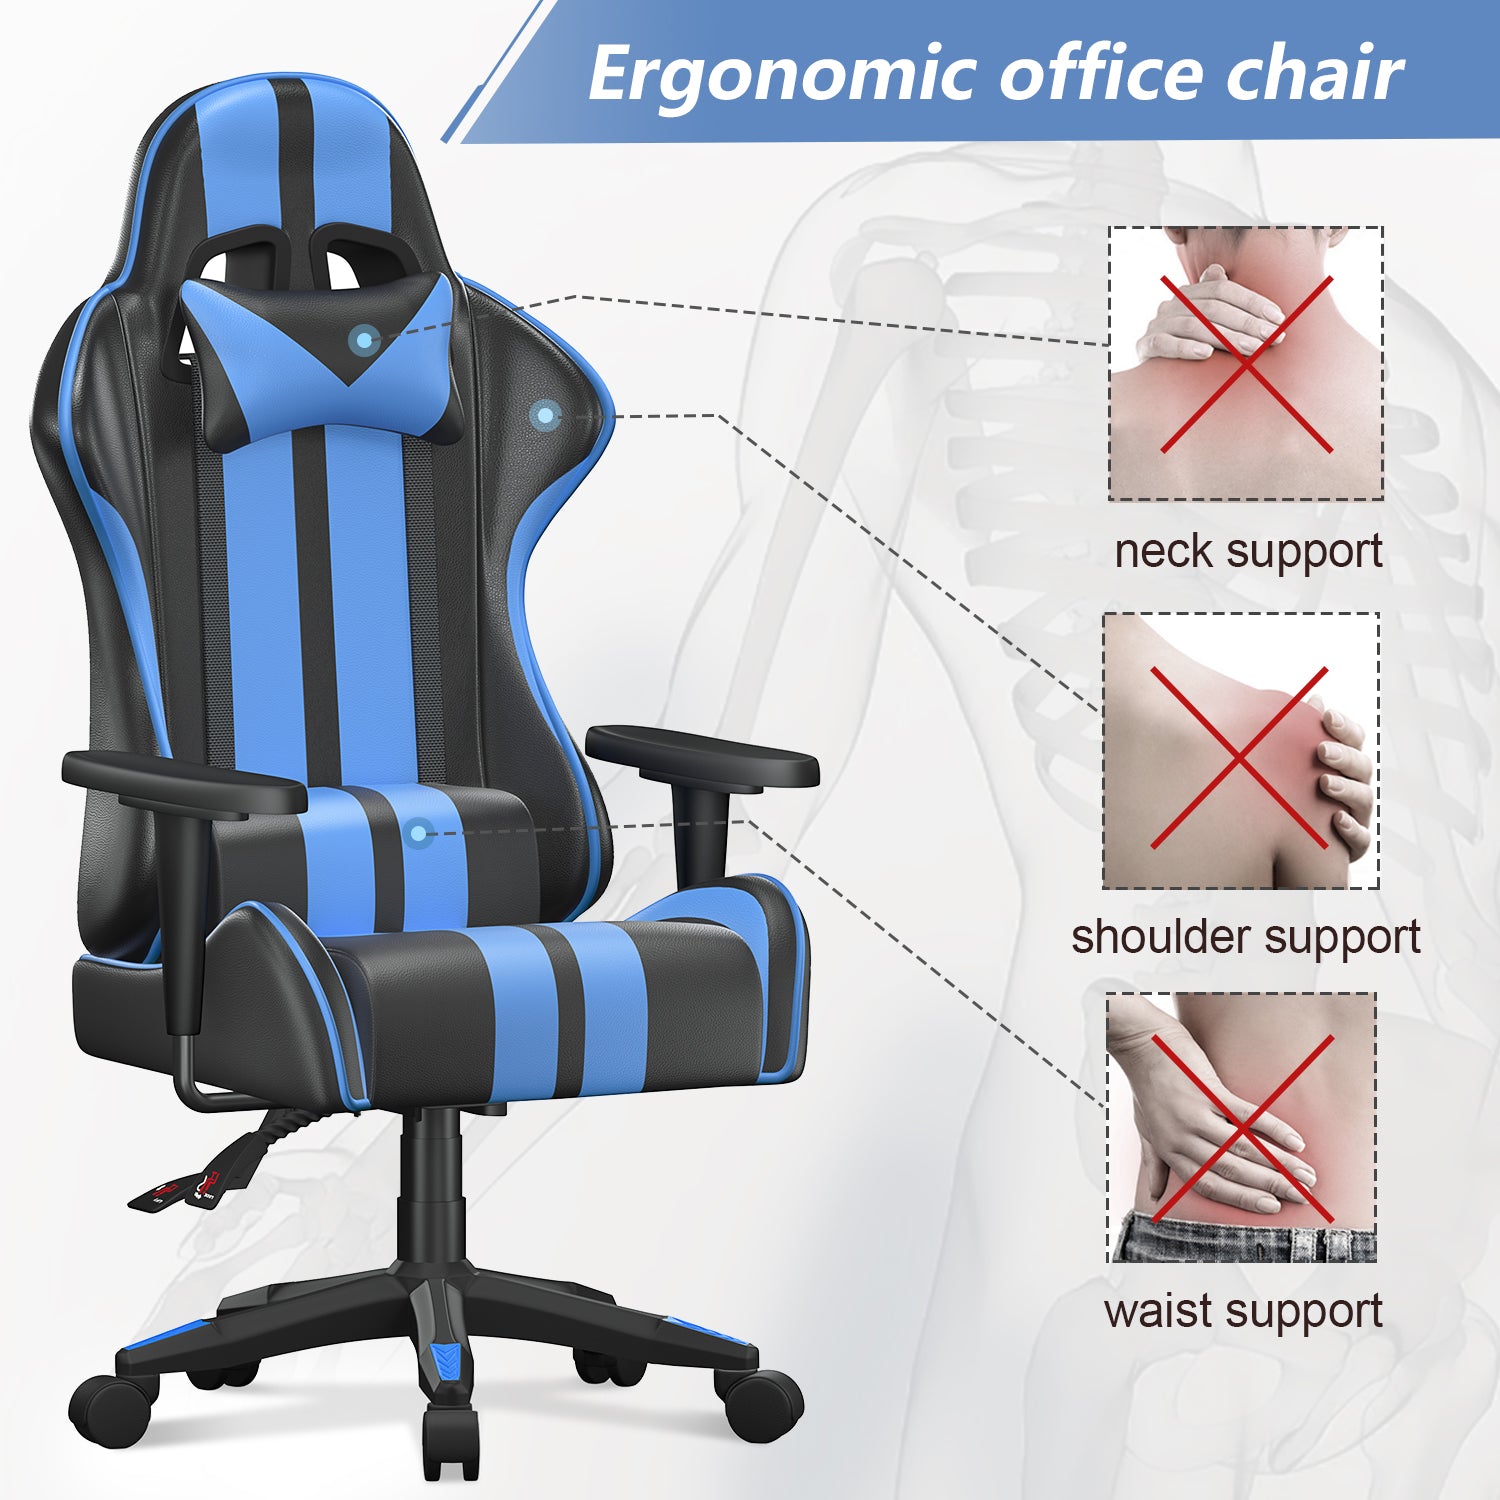 Bigzzia Gaming Chair Ergonomic Office Chair High Back Leather Adjustable Swivel Racing Computer Chair with Headrest and Lumbar Support for Adults Kids Video Game Chair (Blue)